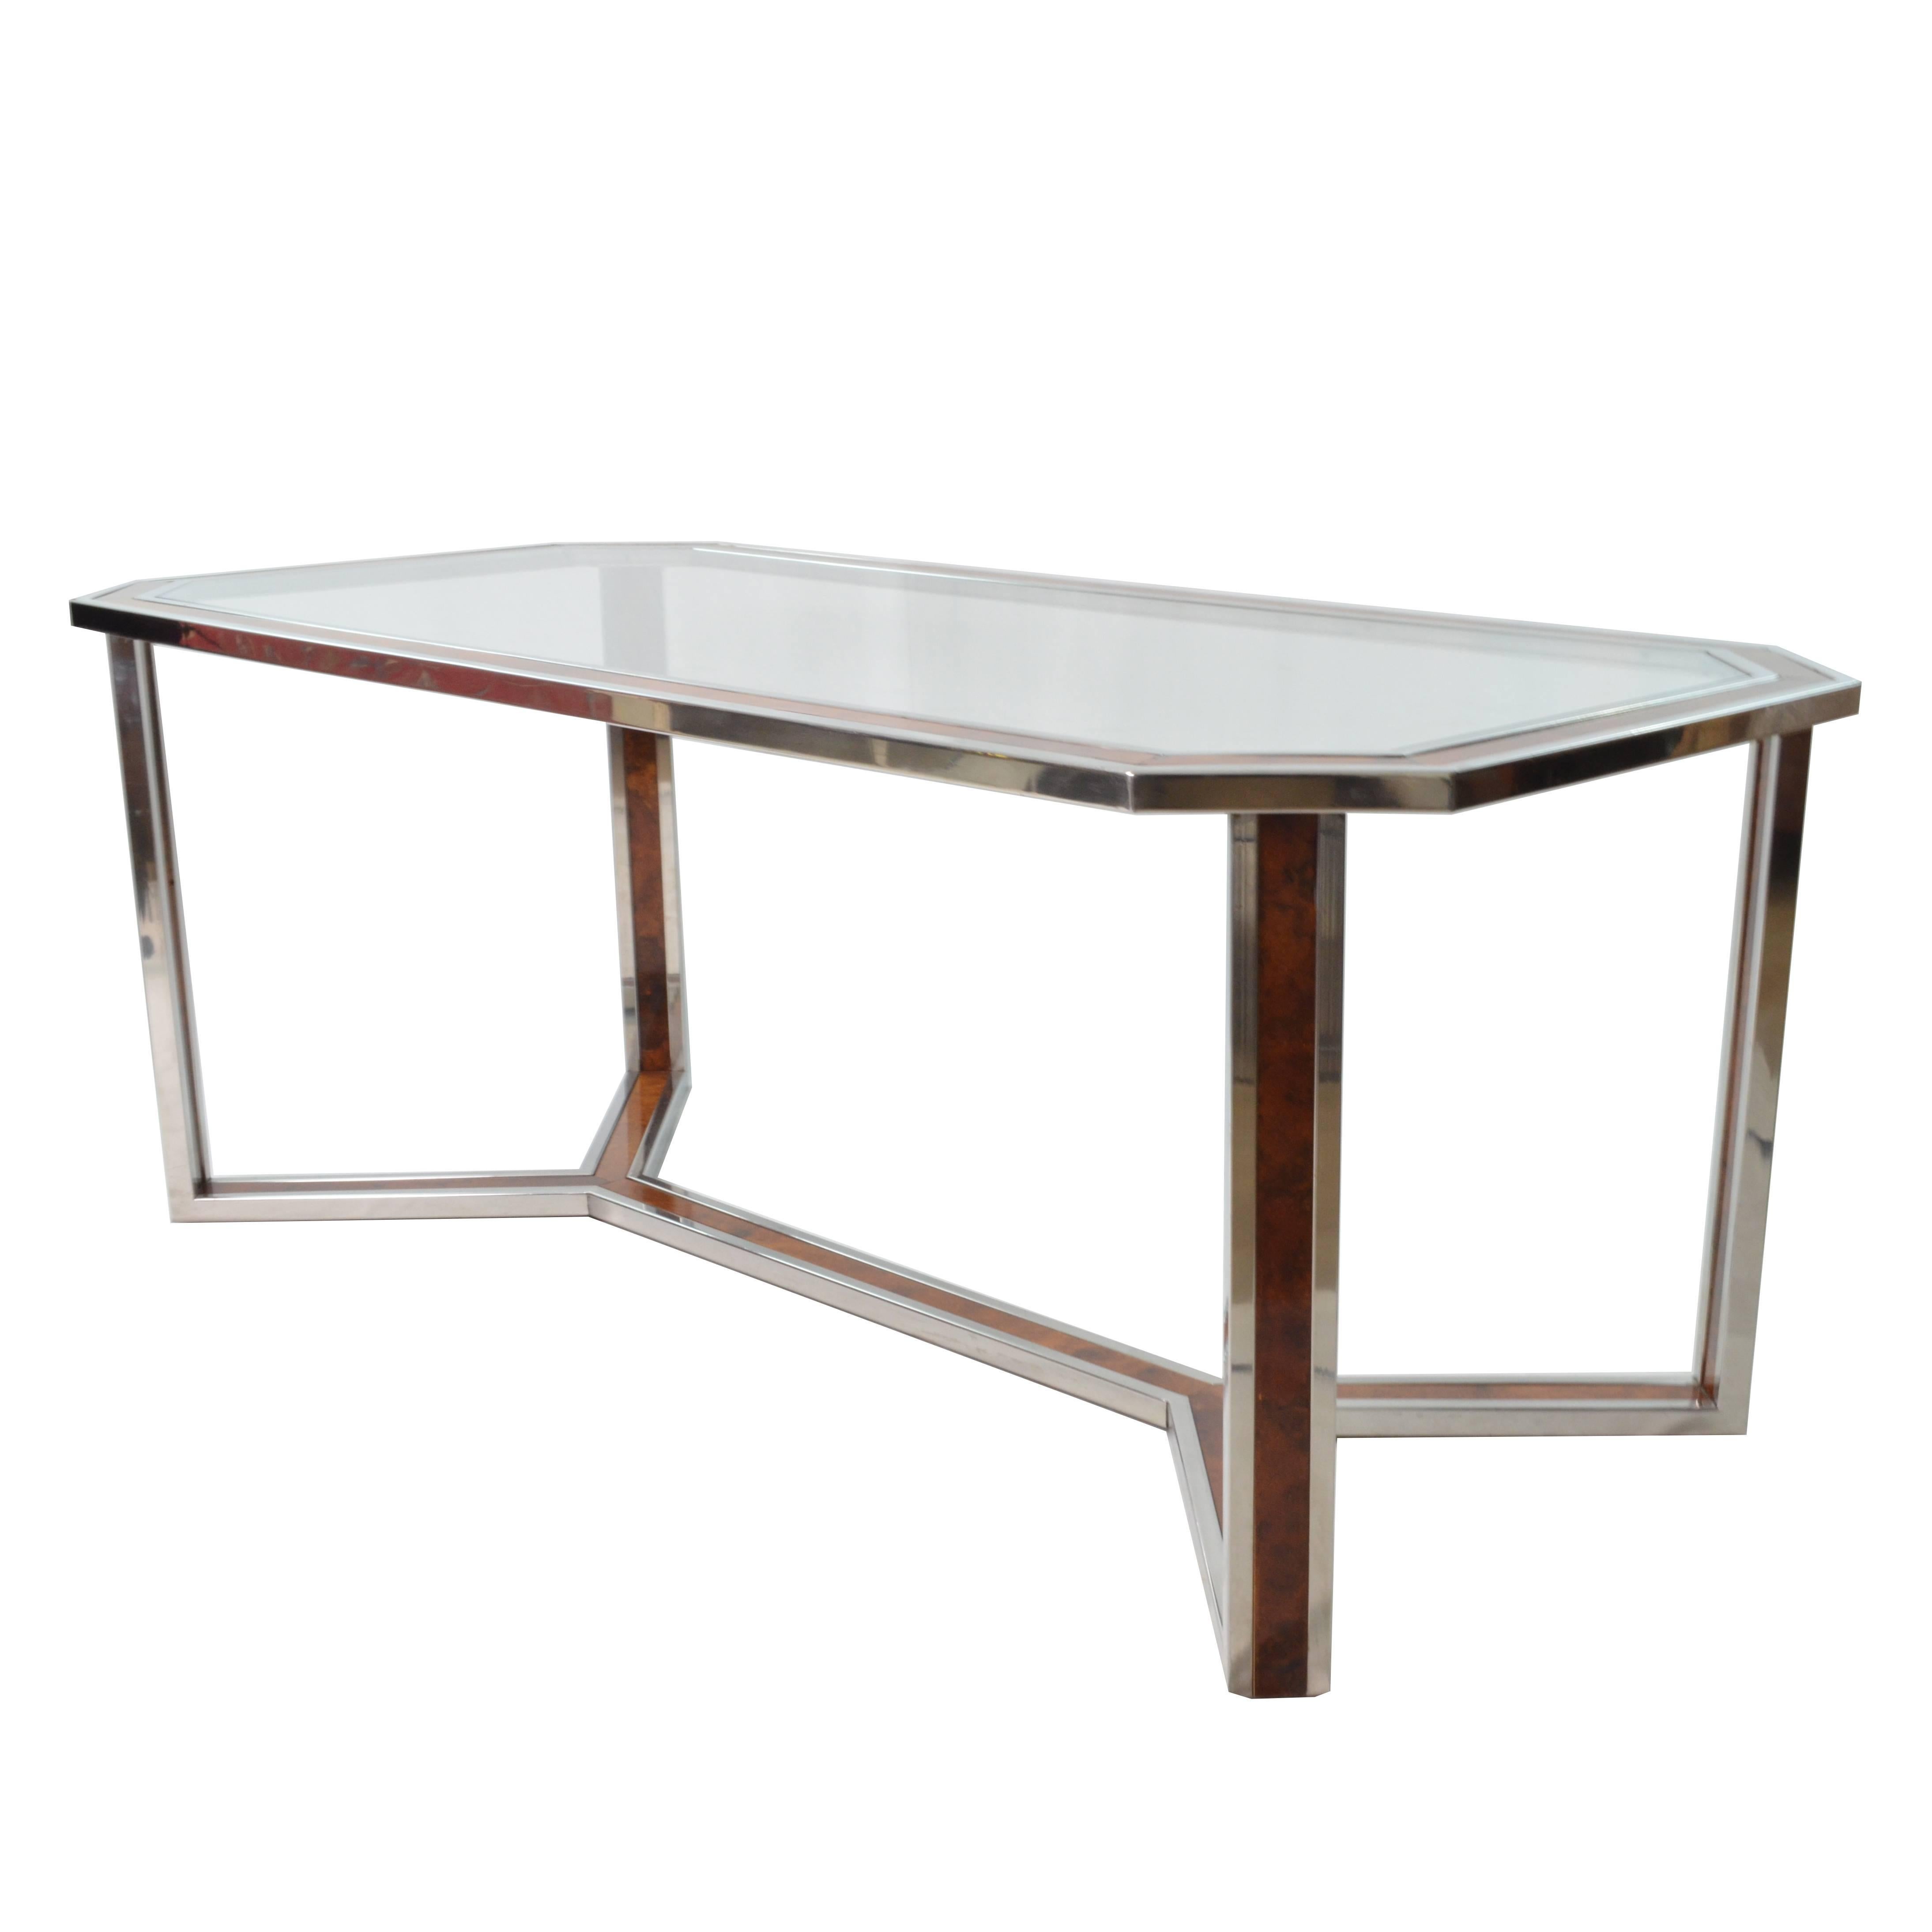 1970s Hexagonal Steel and Wood Table Attributed to Romeo Rega